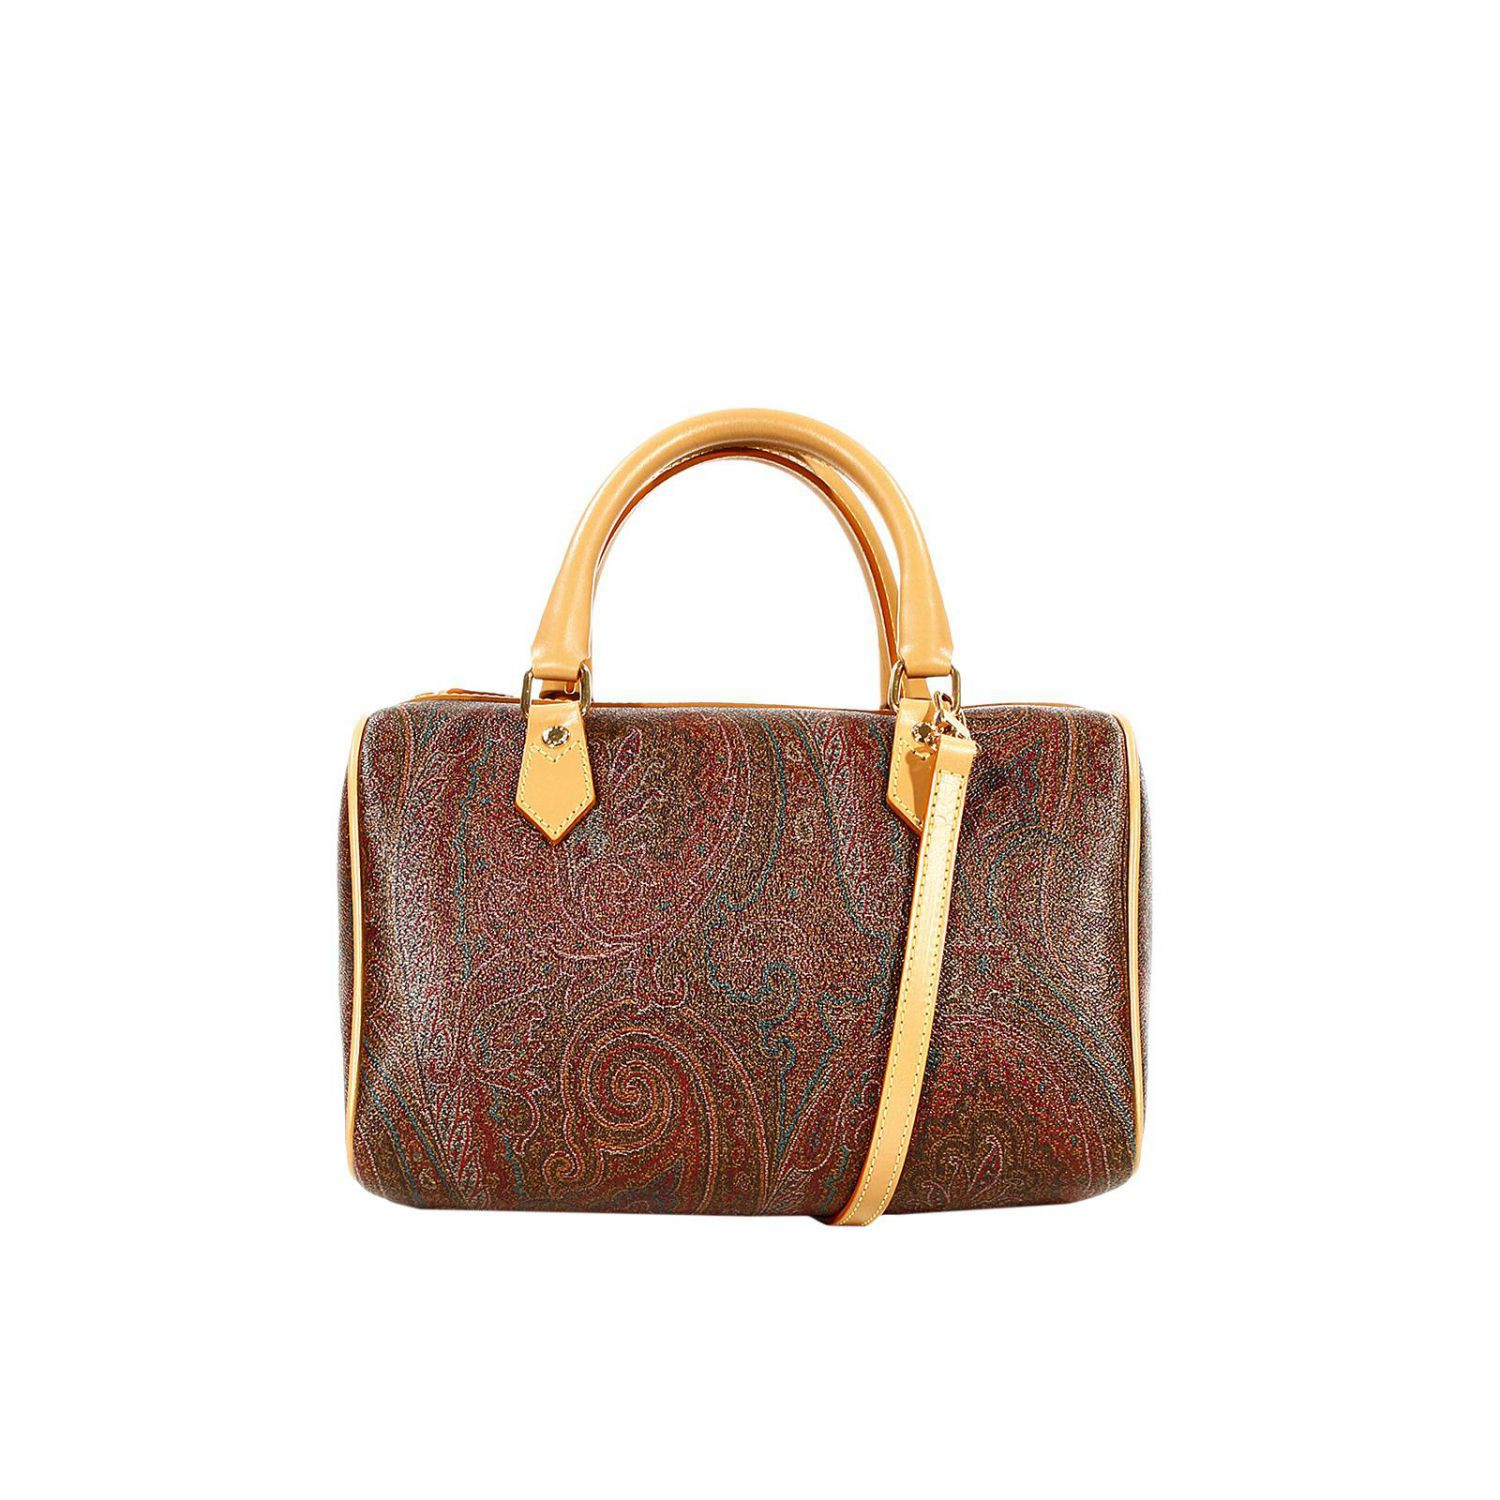 Etro Handbag Small Duffle With Paisley Print in Brown | Lyst